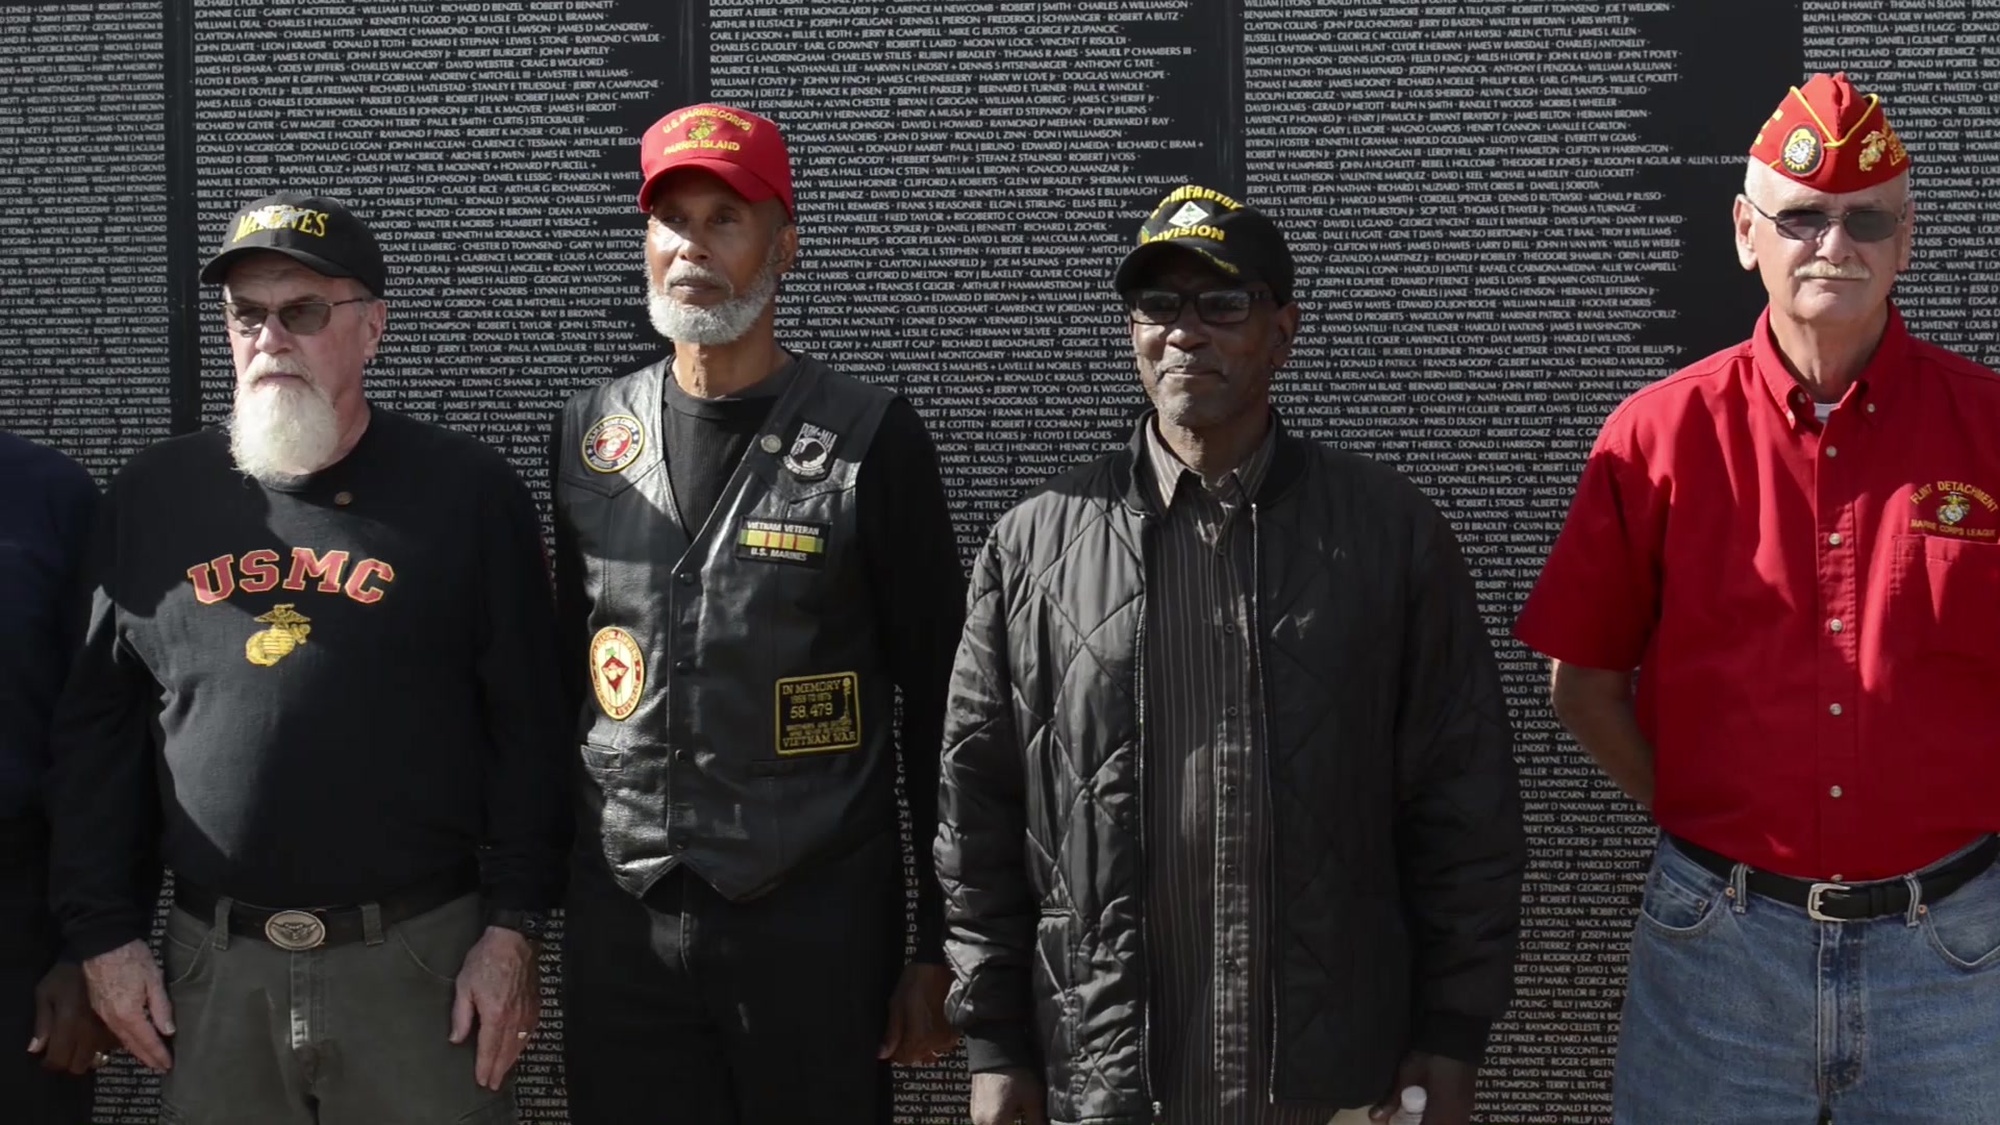 Ten Vietnam Veterans received pins honoring their service during the war. The event took place at the Traveling Vietnam Wall Memorial display at the Hart Plaza in Detroit, Michigan, September 8, 2017. Marines Week volunteers worked with the Traveling Vietnam Wall Memorial crew to setup the event as part of Marine Week Detroit, which gives the Detroit community a unique opportunity to connect with Marines and veterans.